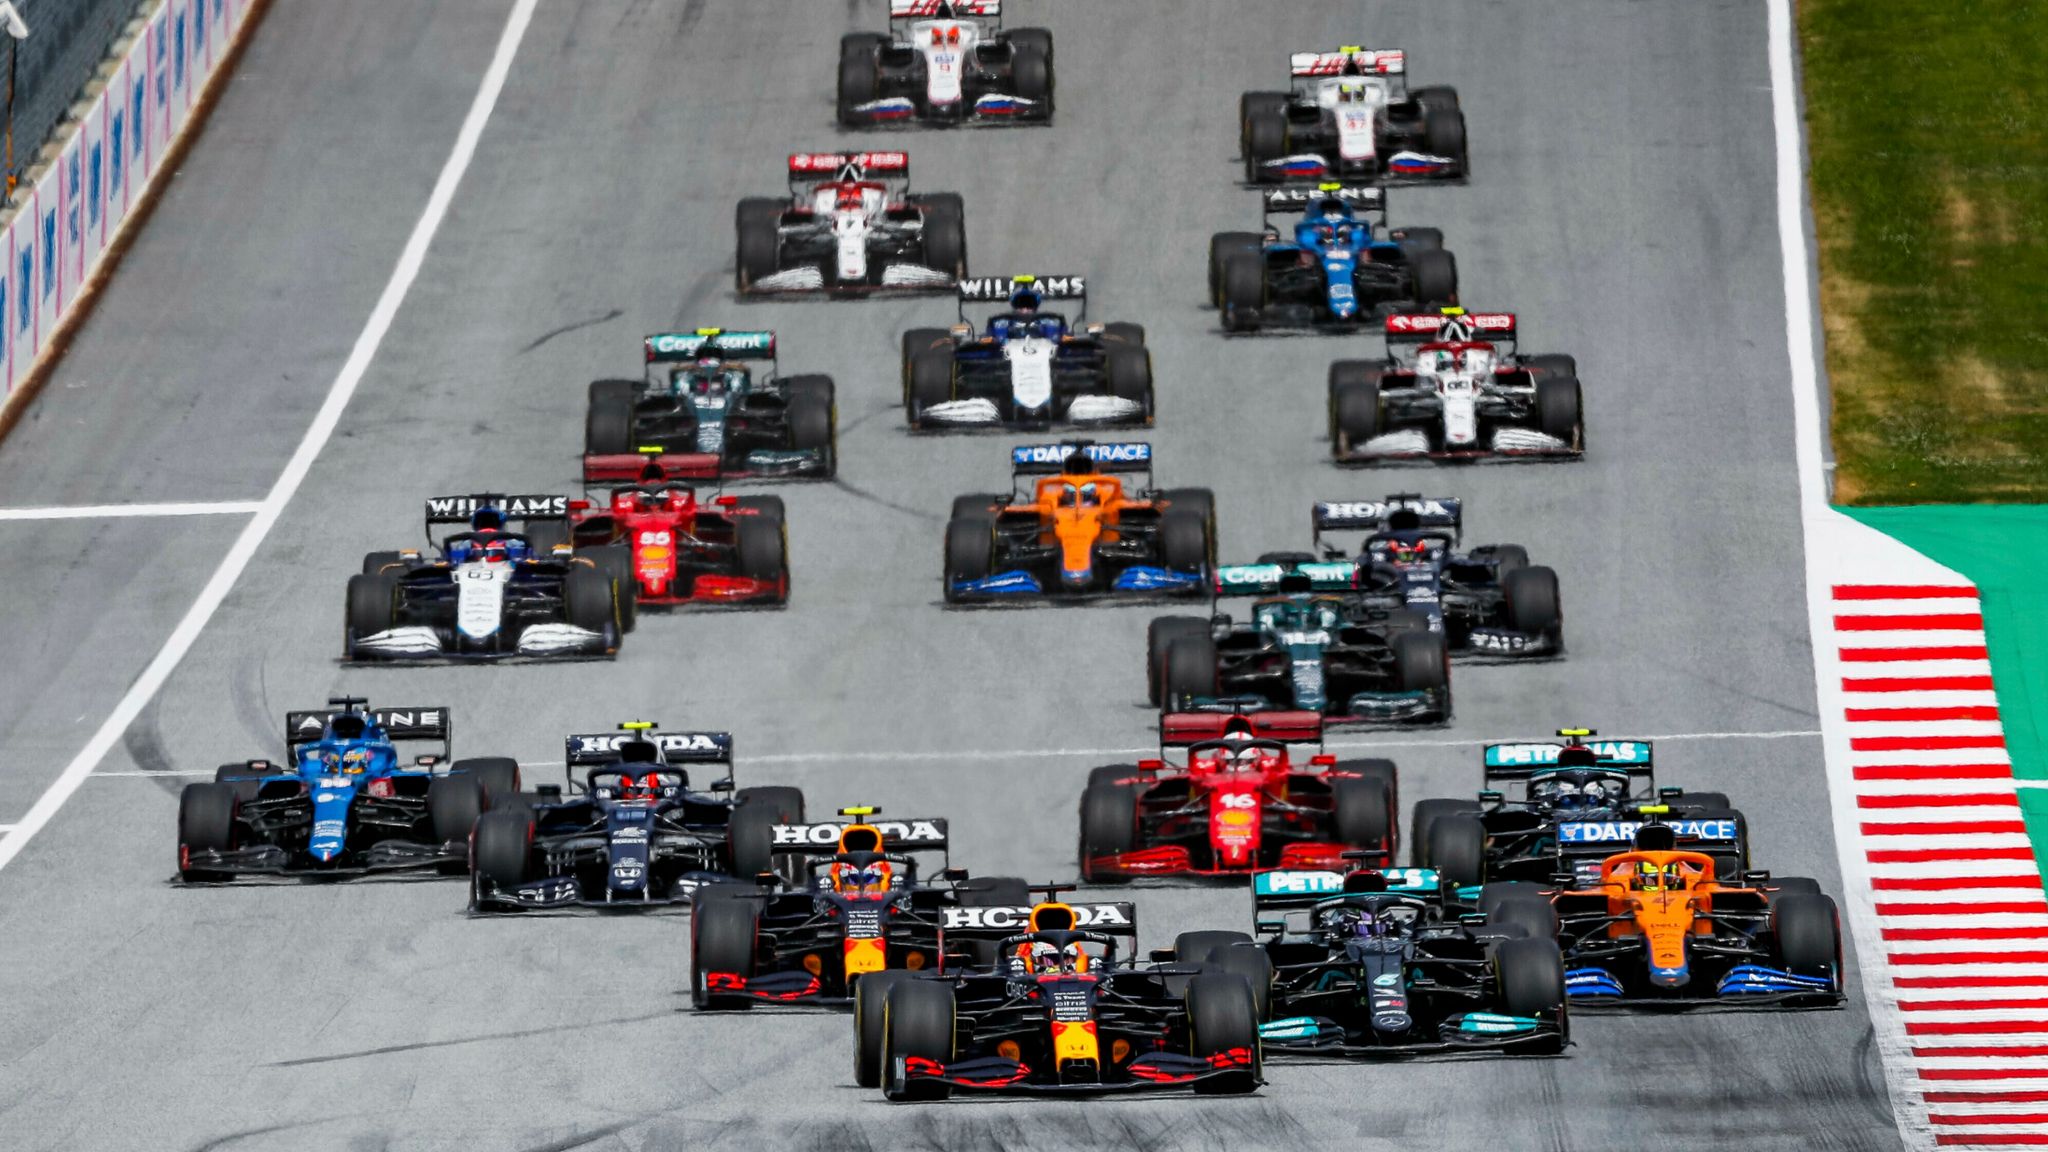 Austrian GP schedule When to watch the race, qualifying and practice live on Sky Sports F1 F1 News